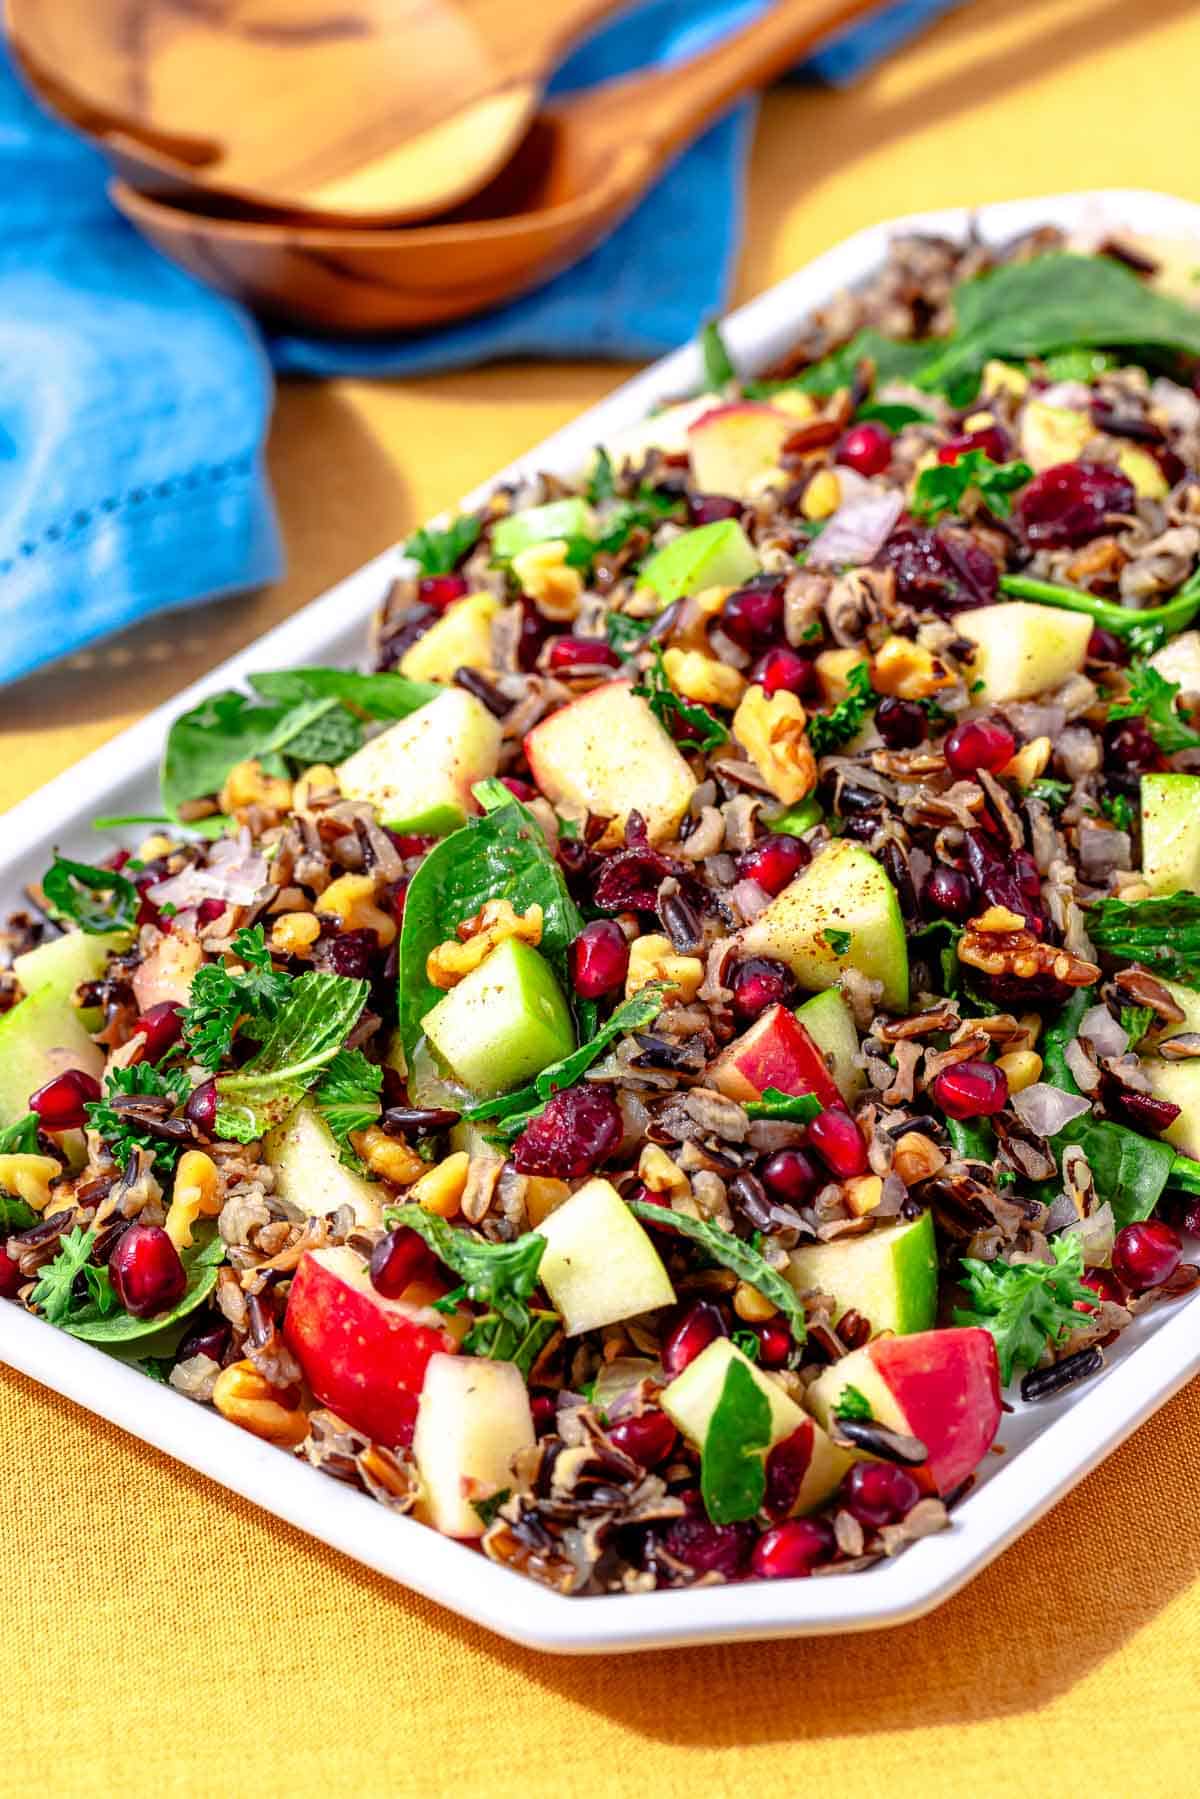 Wild Rice Salad with Apples, Pomegranate, Cranberries, and Walnuts